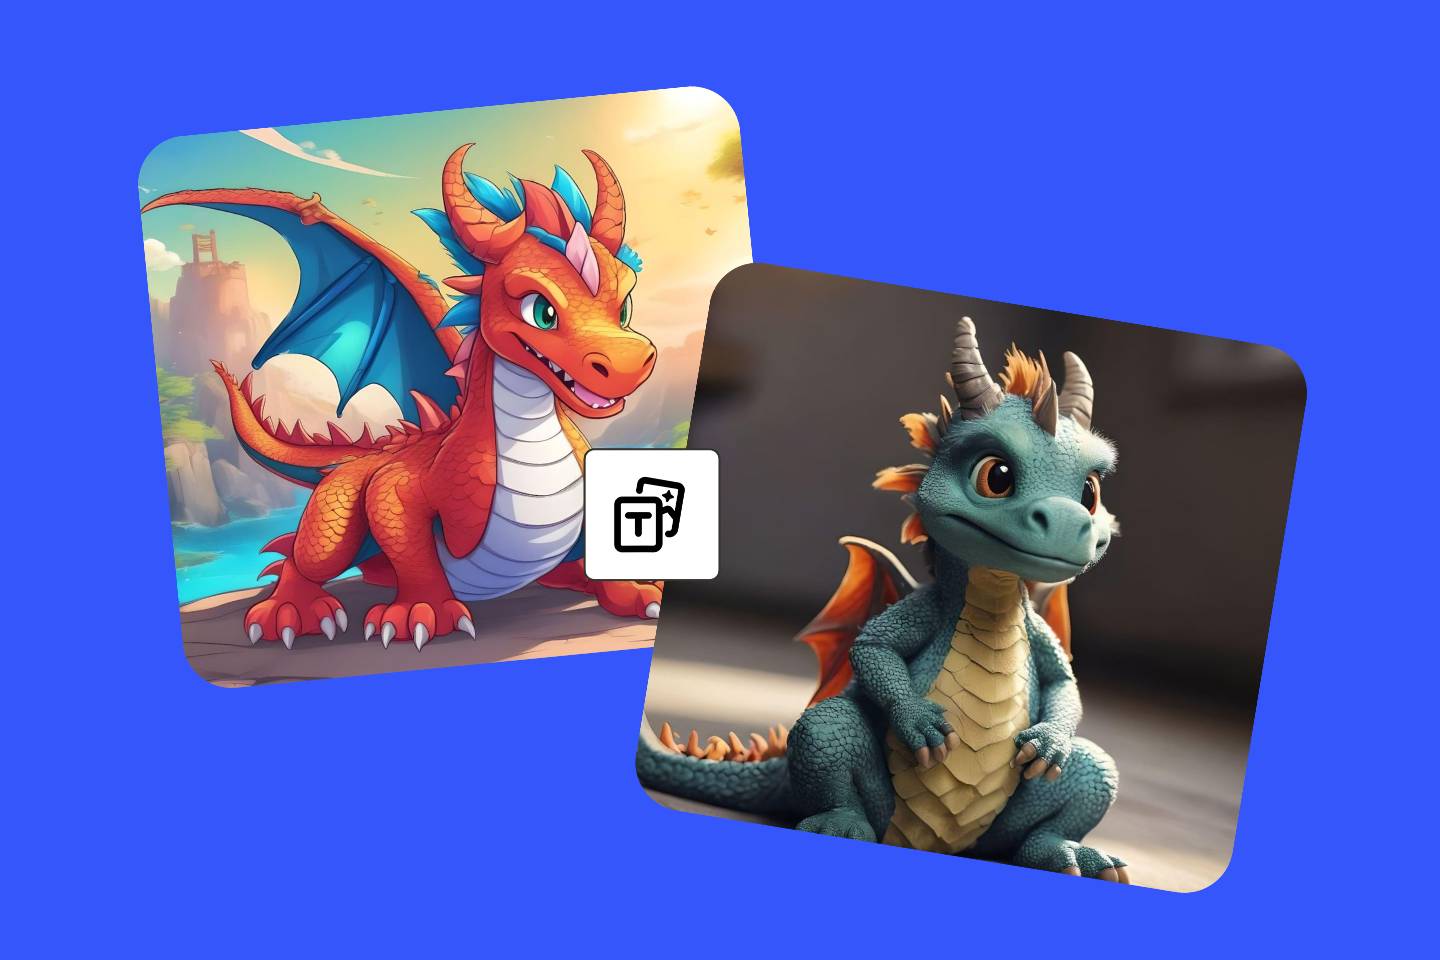 Make a dragon online for free with Fotor dragon maker